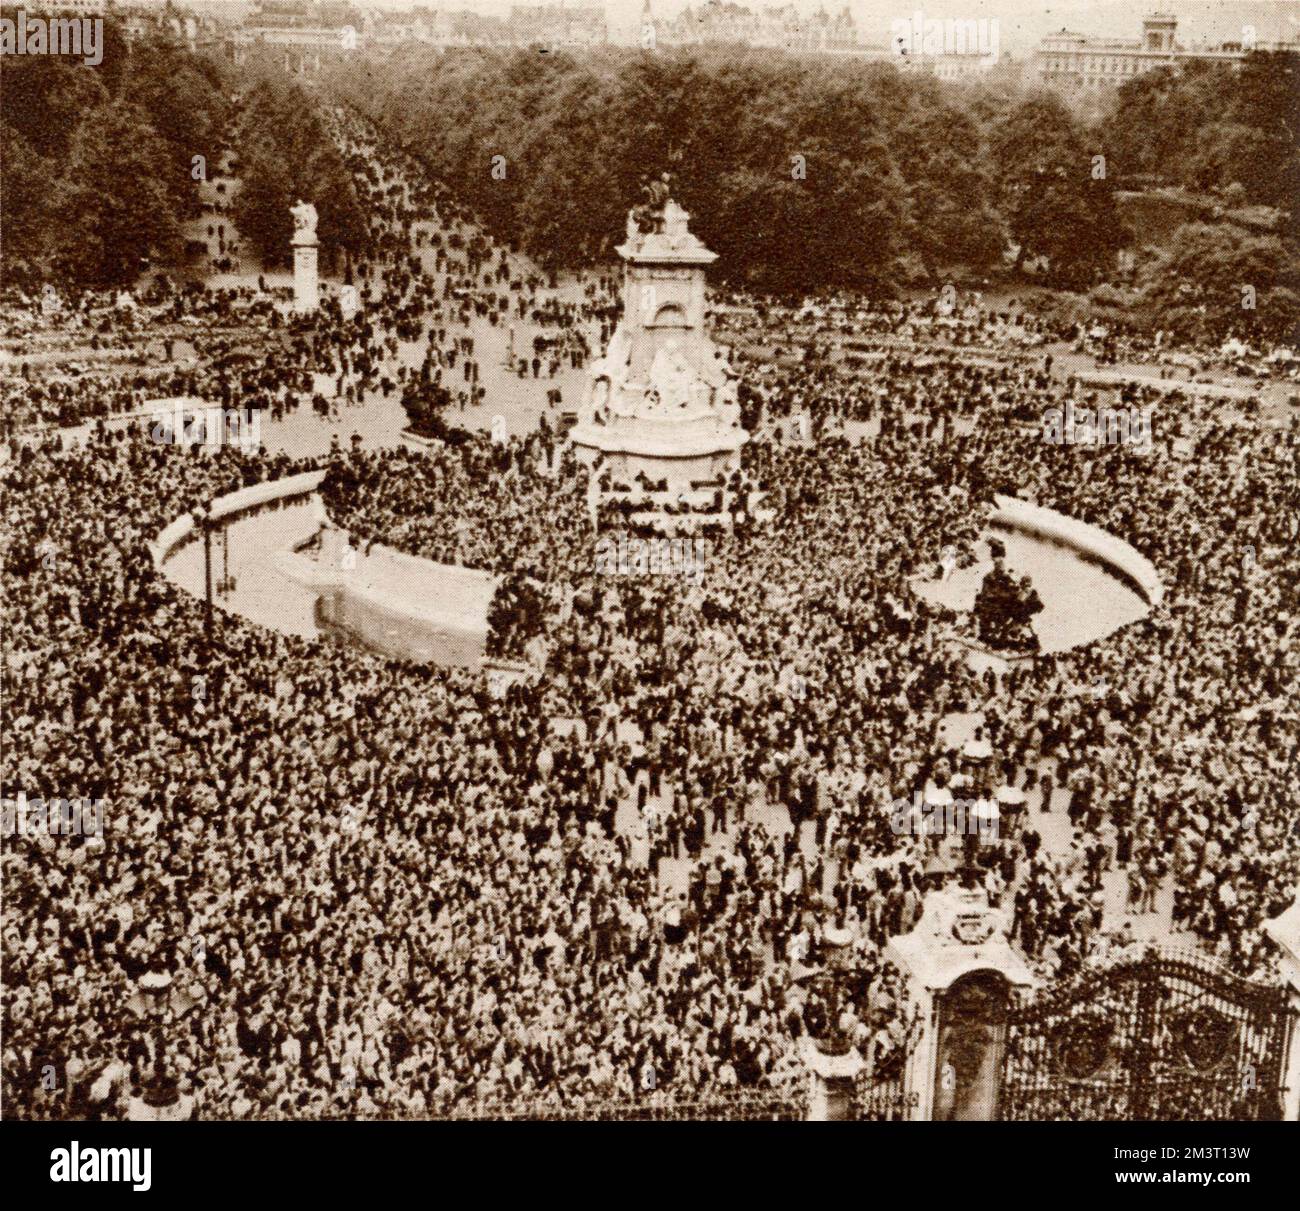 People celebrating VE Day congregating in front of Buckingham Palace where eventually the royal family and Prime Minister will emerge to wave from the balcony. Stock Photo